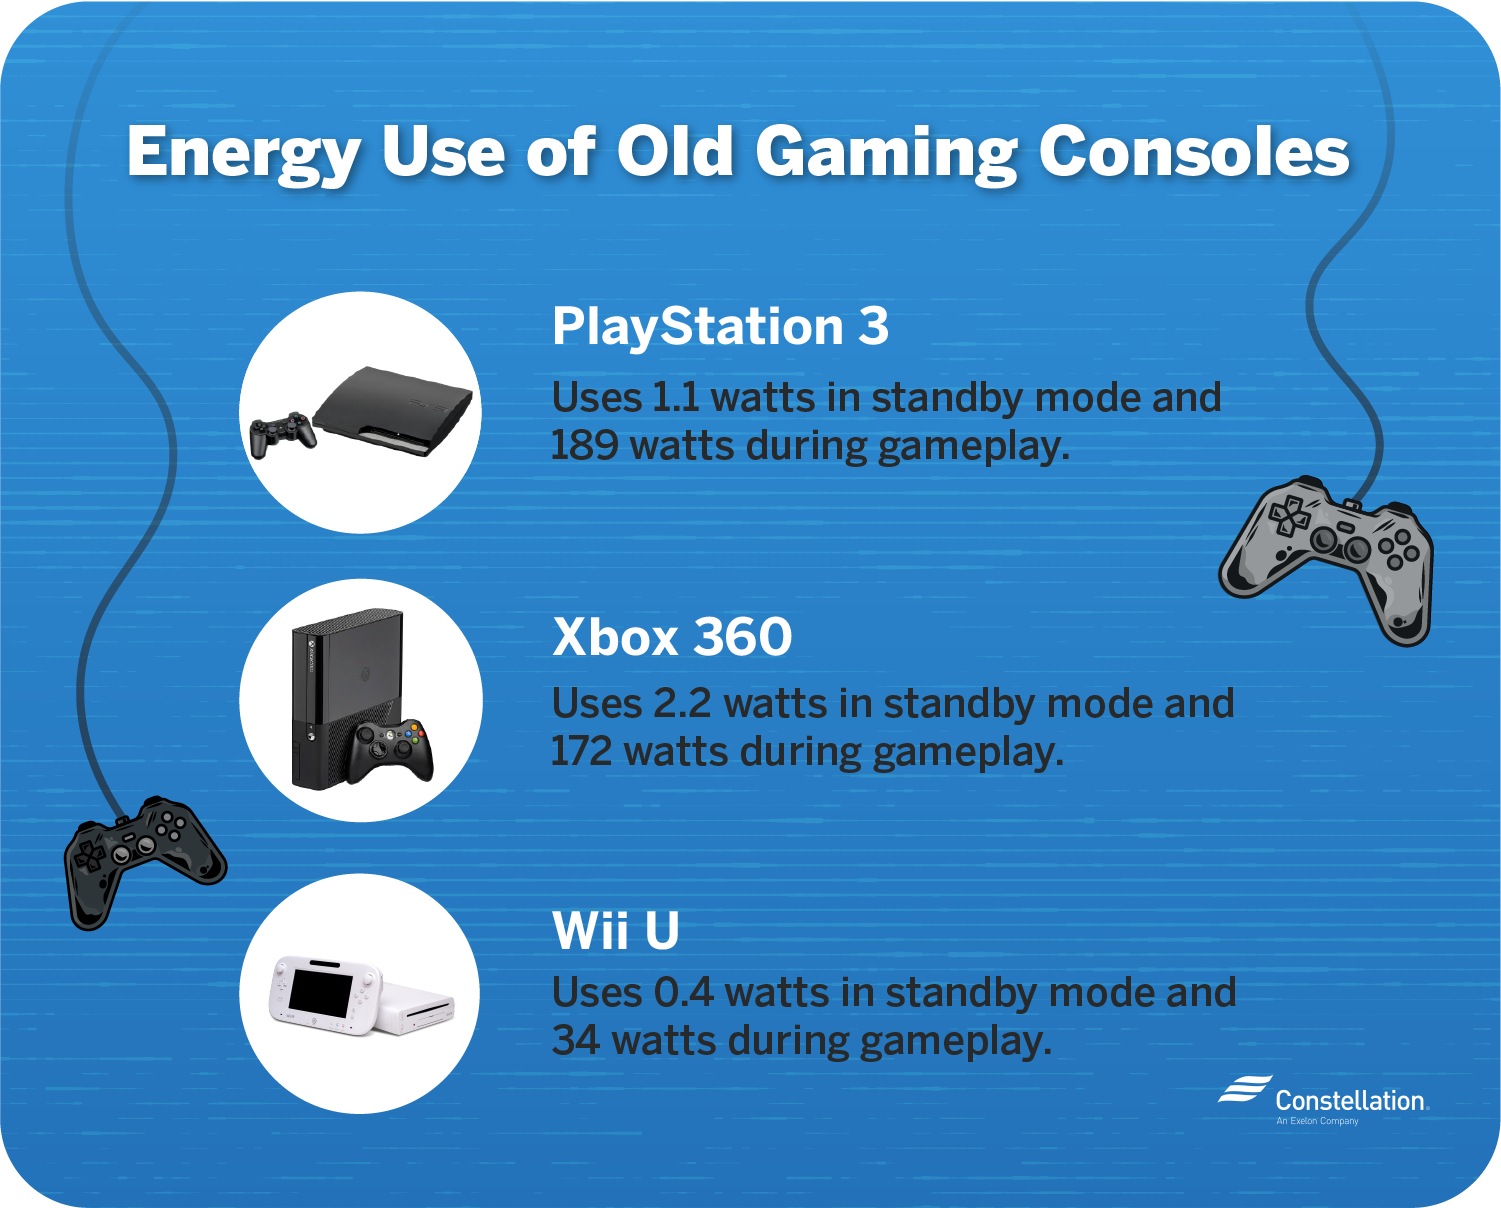 How Much Electricity Does An Xbox 360 Use Uk?